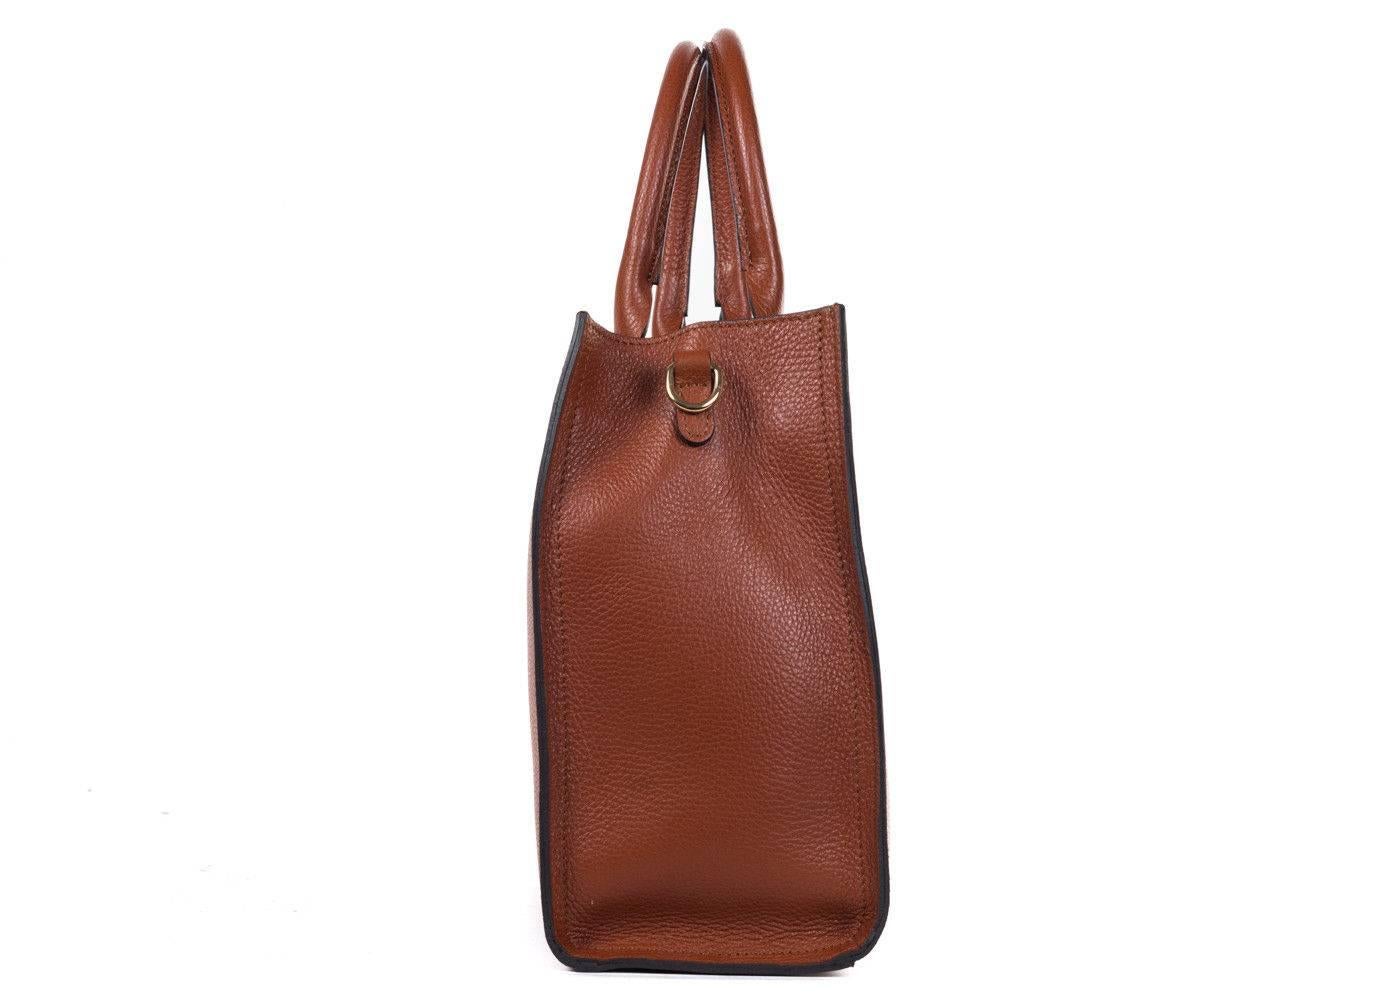 Roberto Cavalli Structured Brown Grainy Calf Leather Tote Bag In New Condition For Sale In Brooklyn, NY